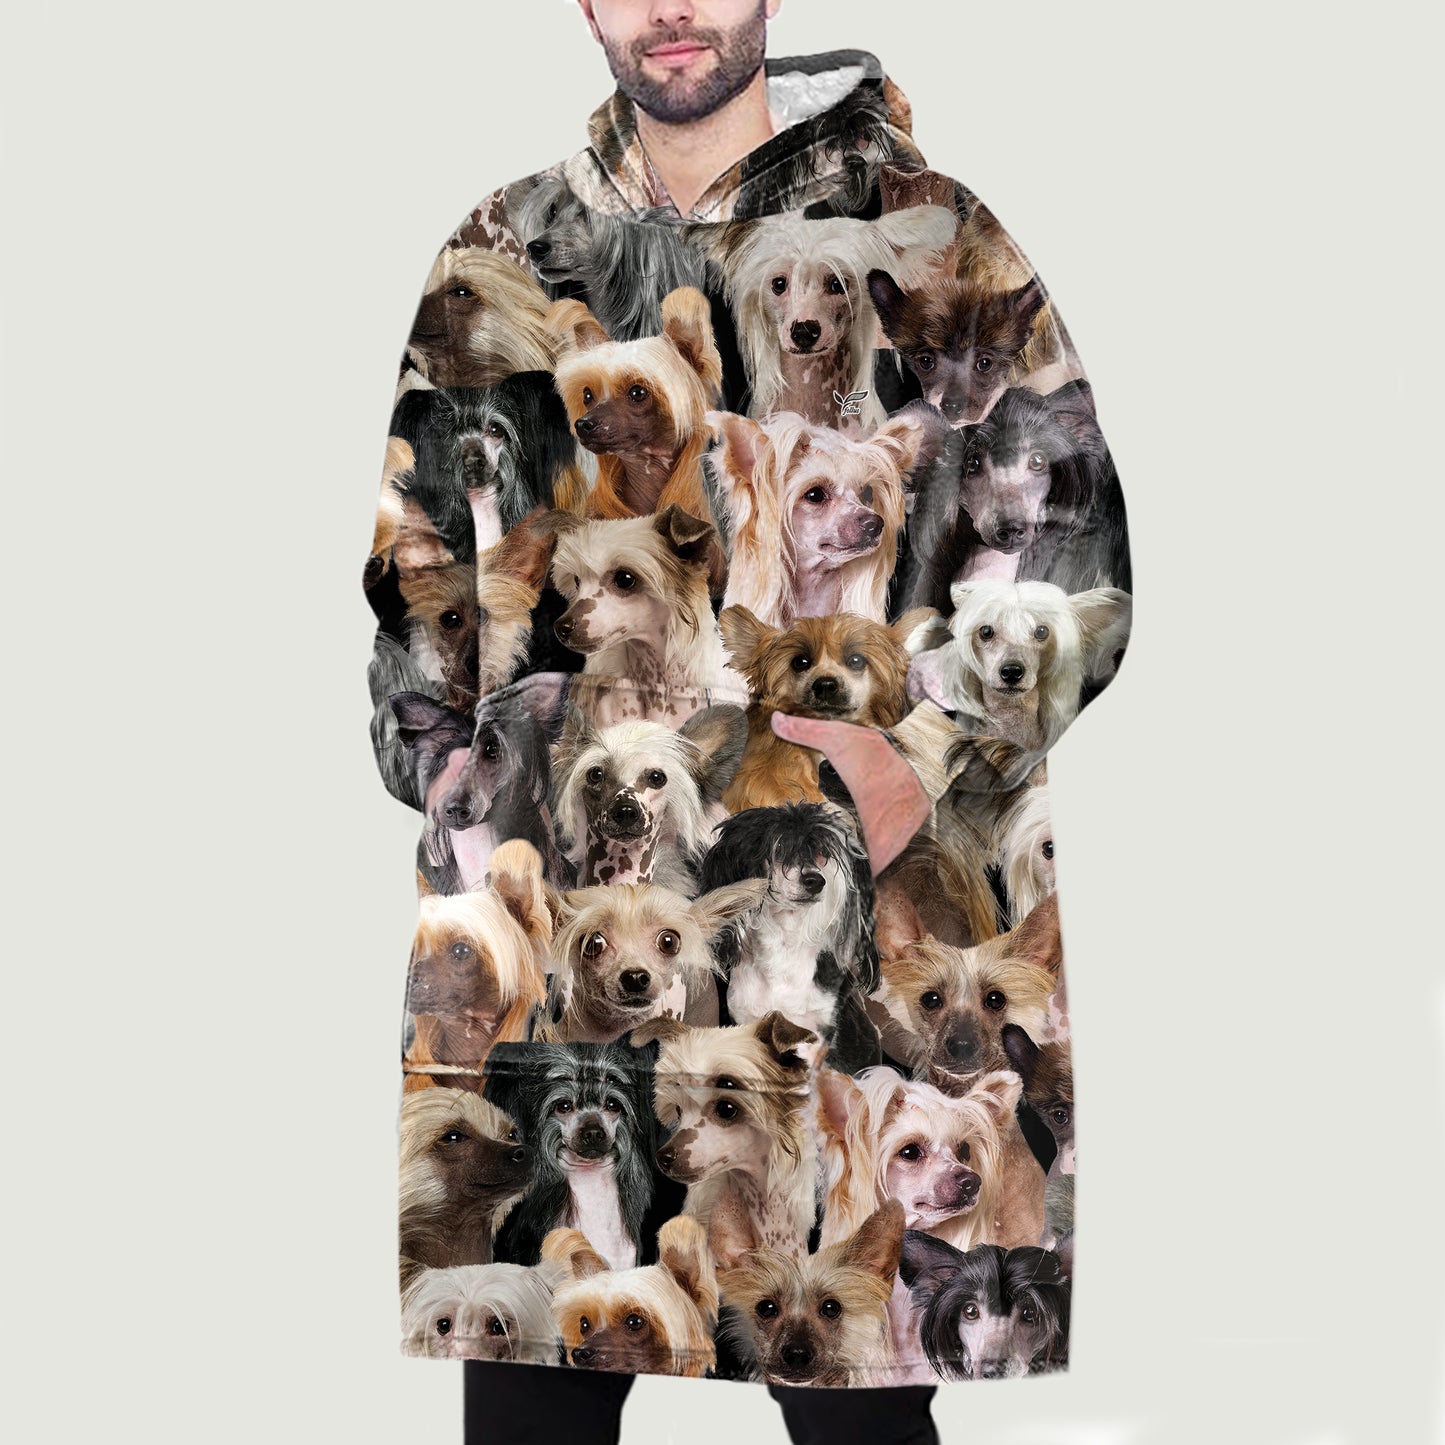 Warm Winter With Chinese Cresteds - Fleece Blanket Hoodie